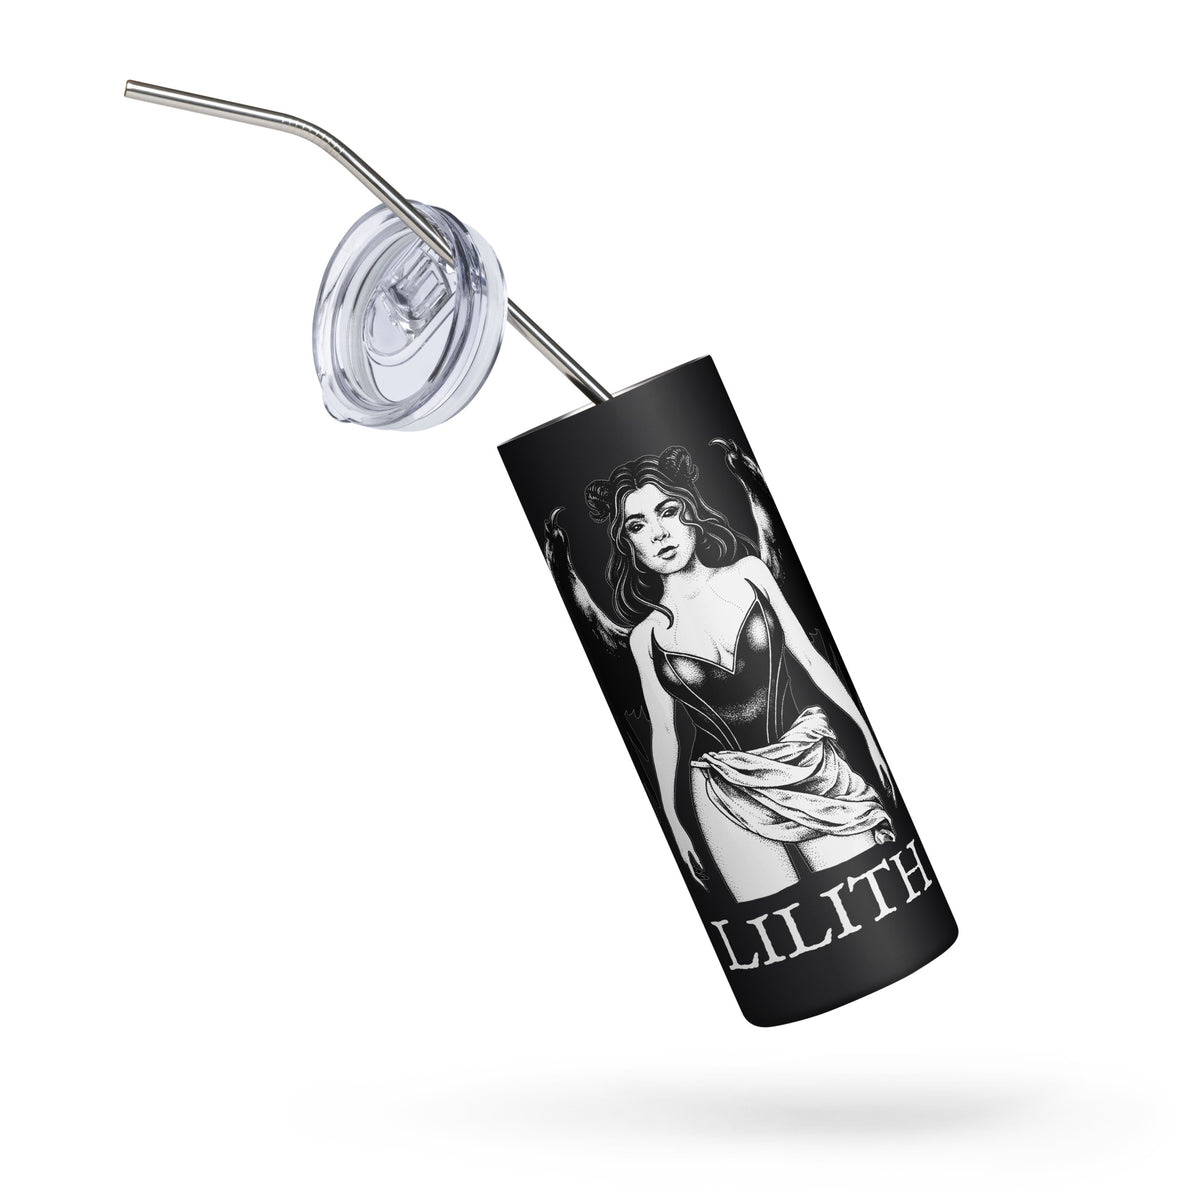 Lilith 20oz Stainless Steel Tumbler